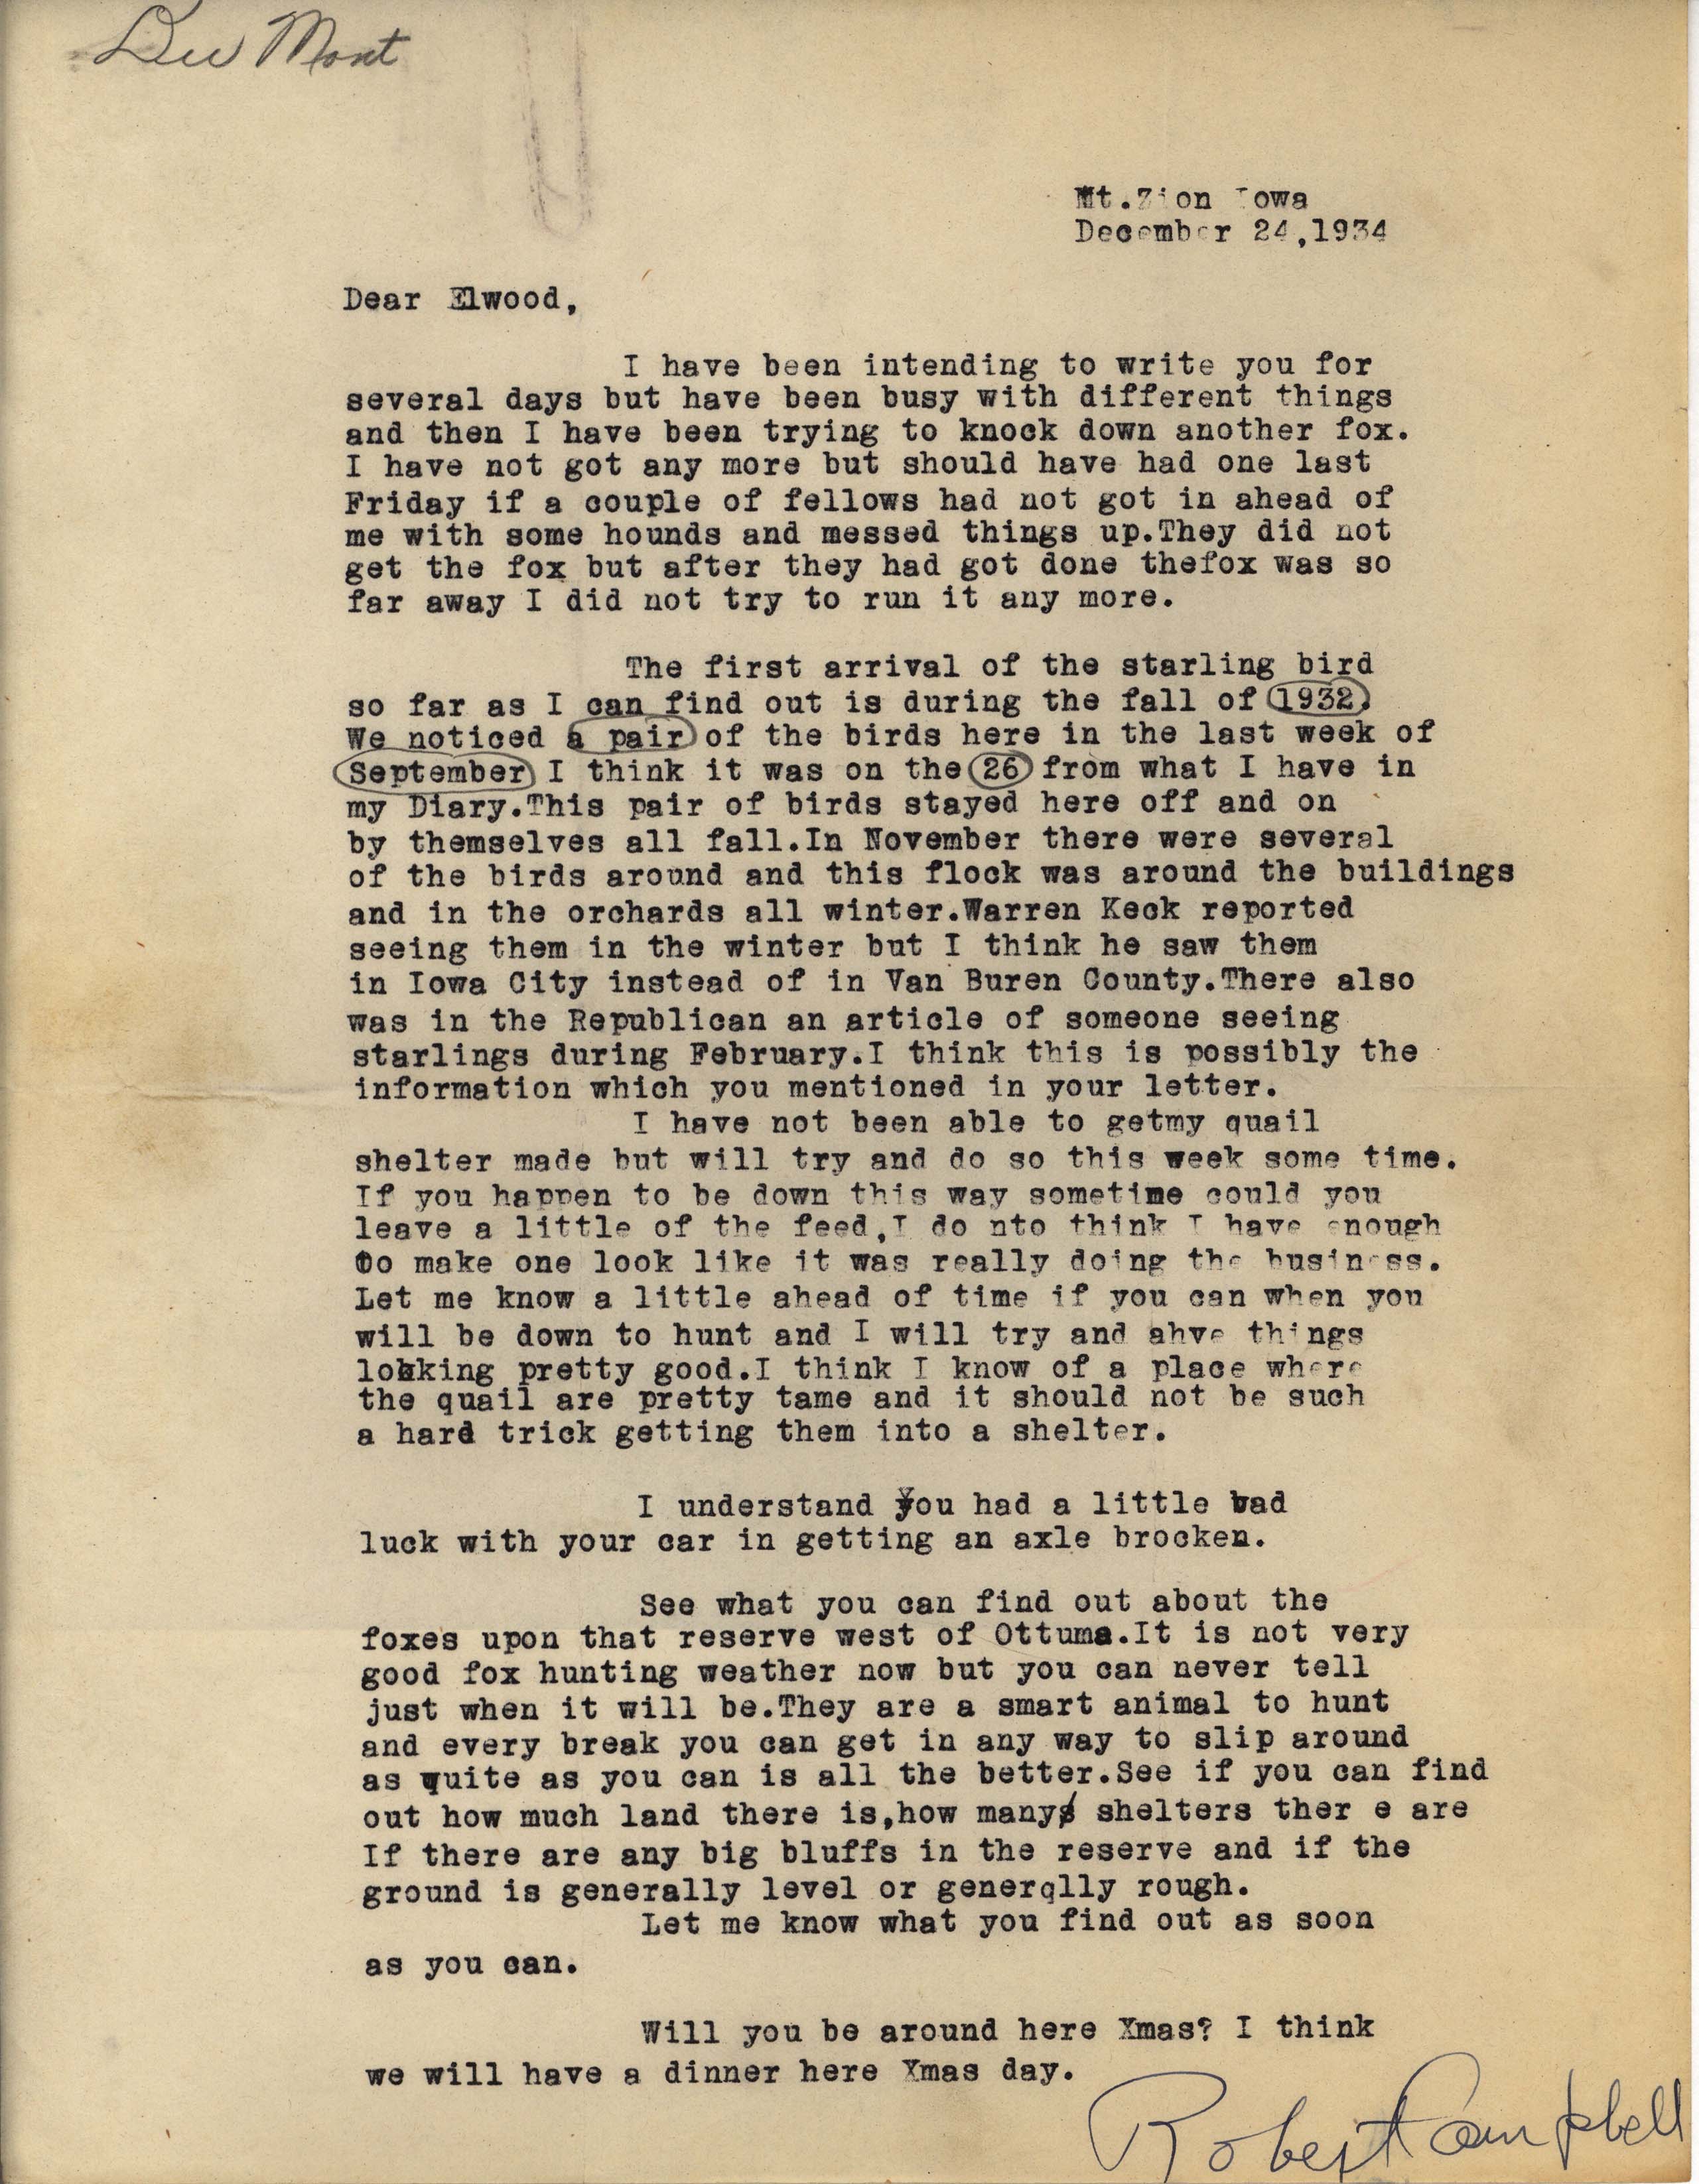 Robert Campbell letter to Elwood regarding fox hunting, Starlings, and Quail, December 24, 1934